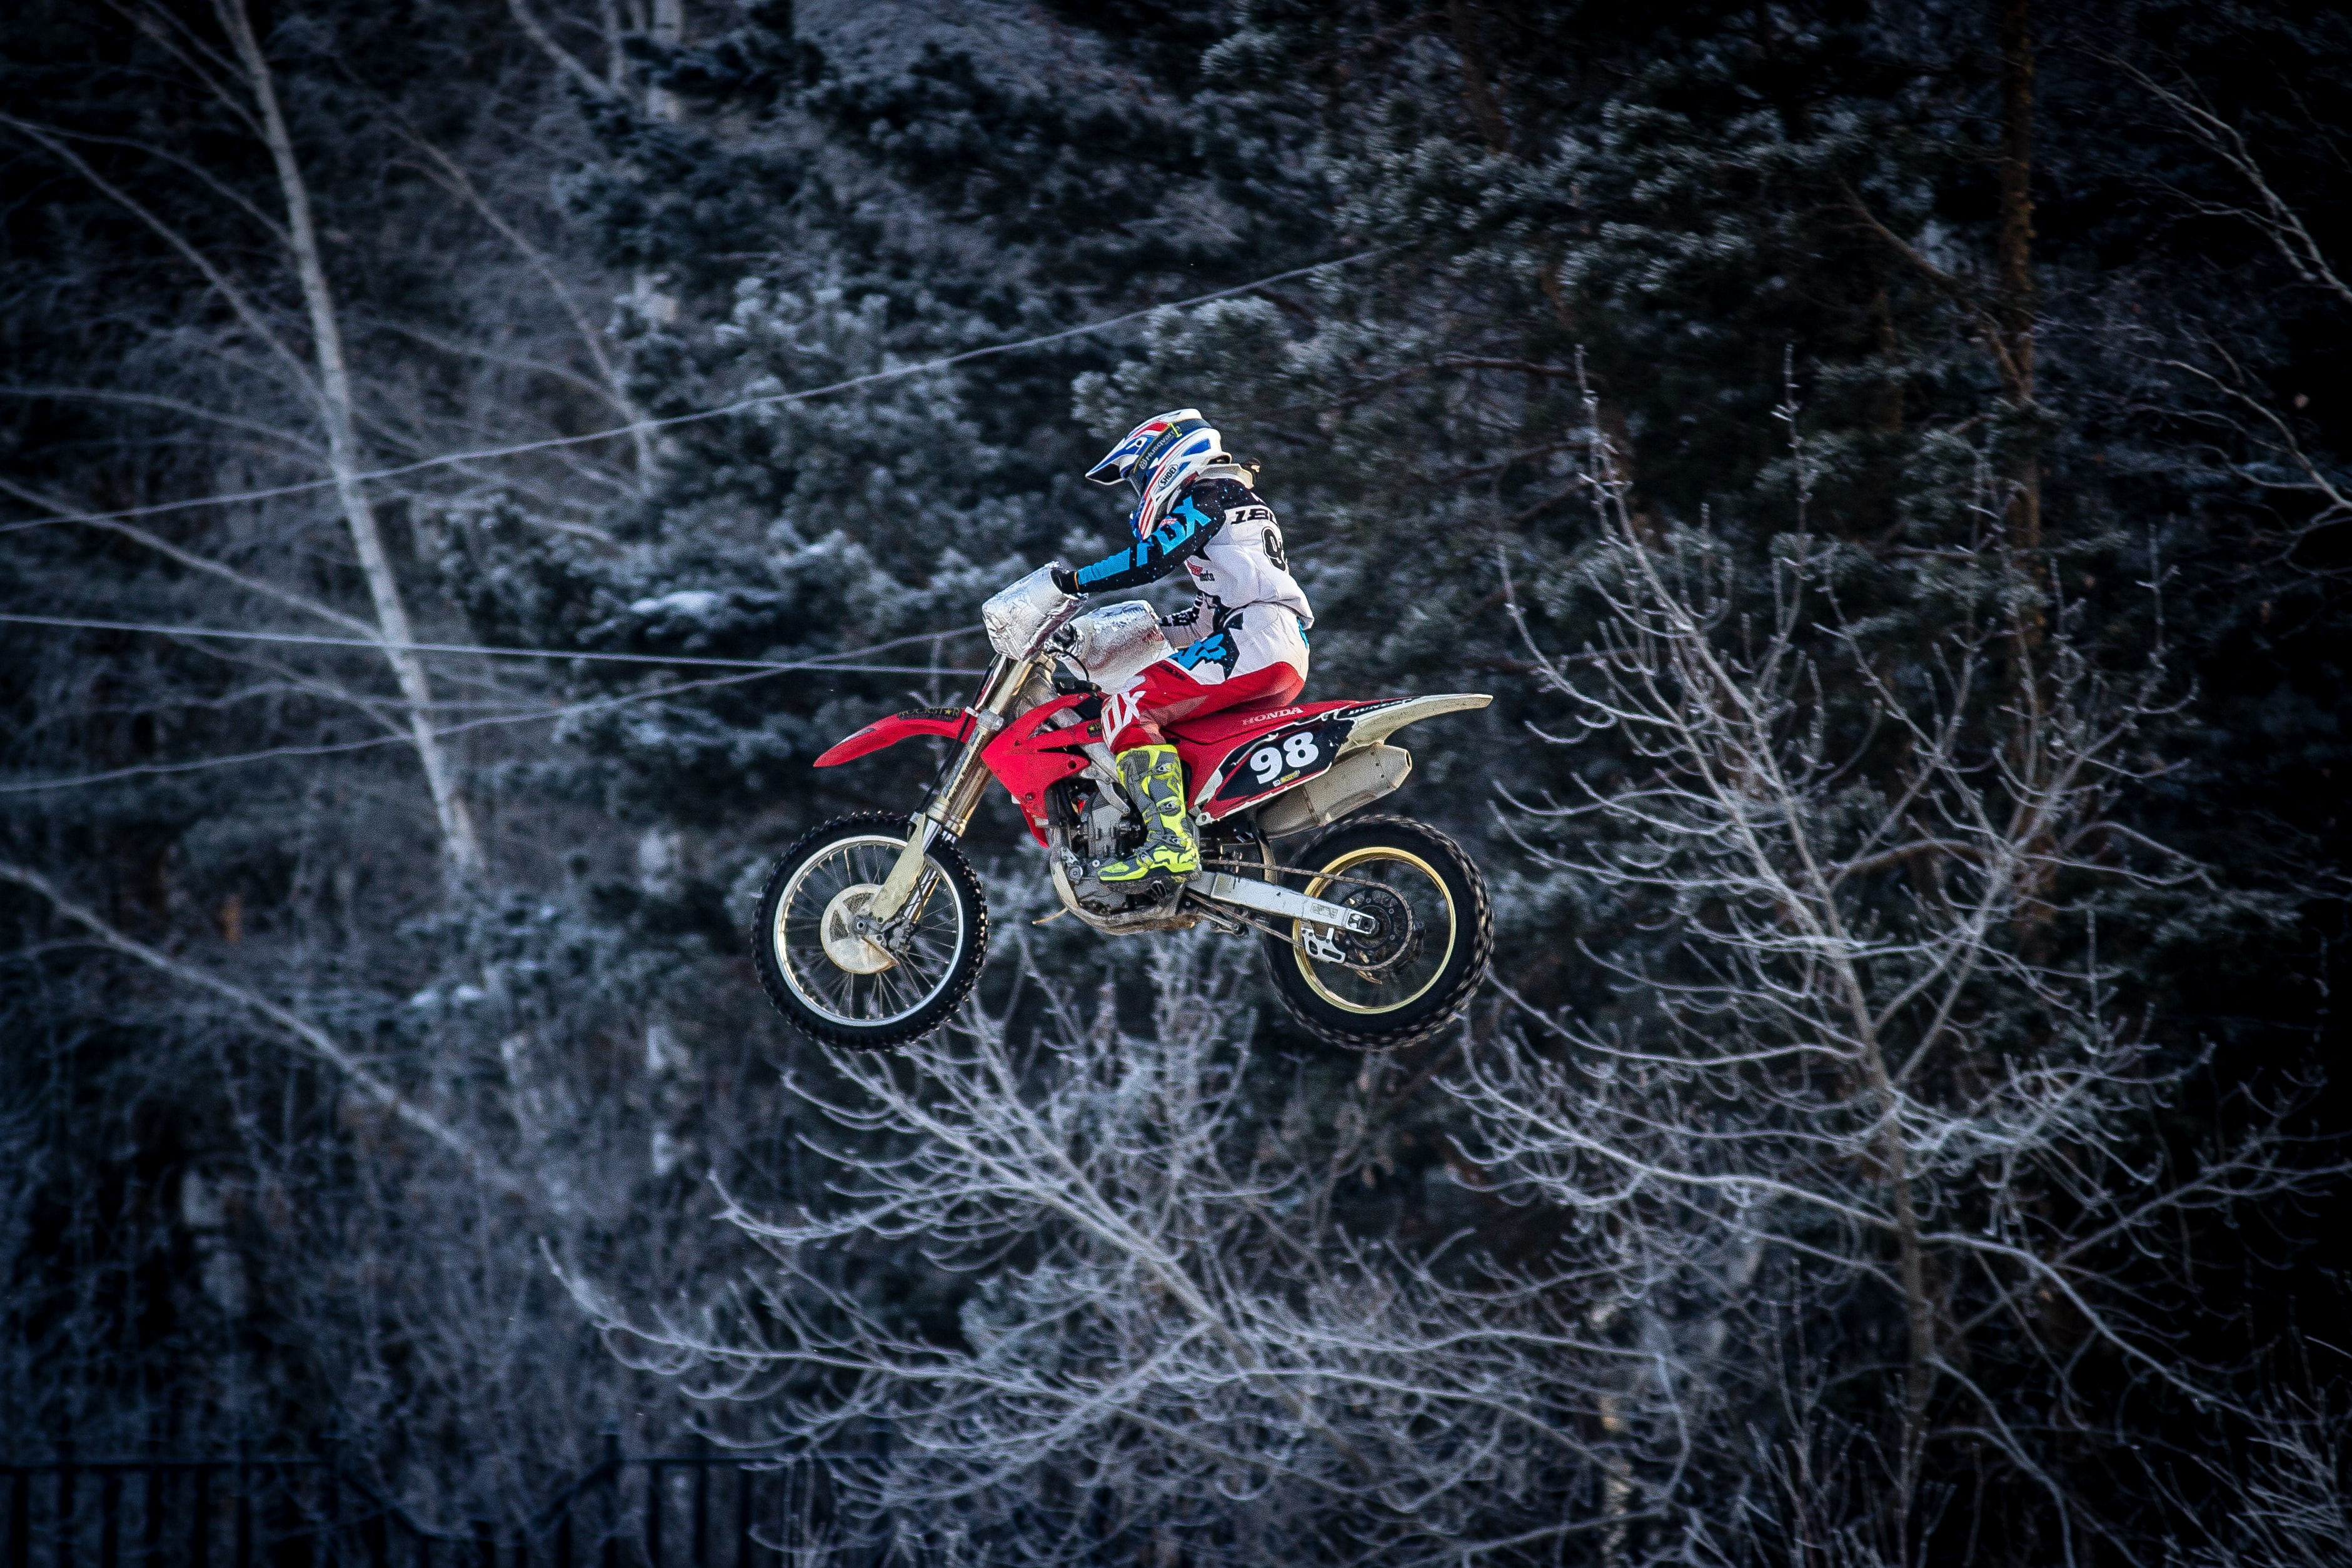 trick, extreme, motorcycles, winter, honda, motorcyclist, motorcycle, bounce, jump